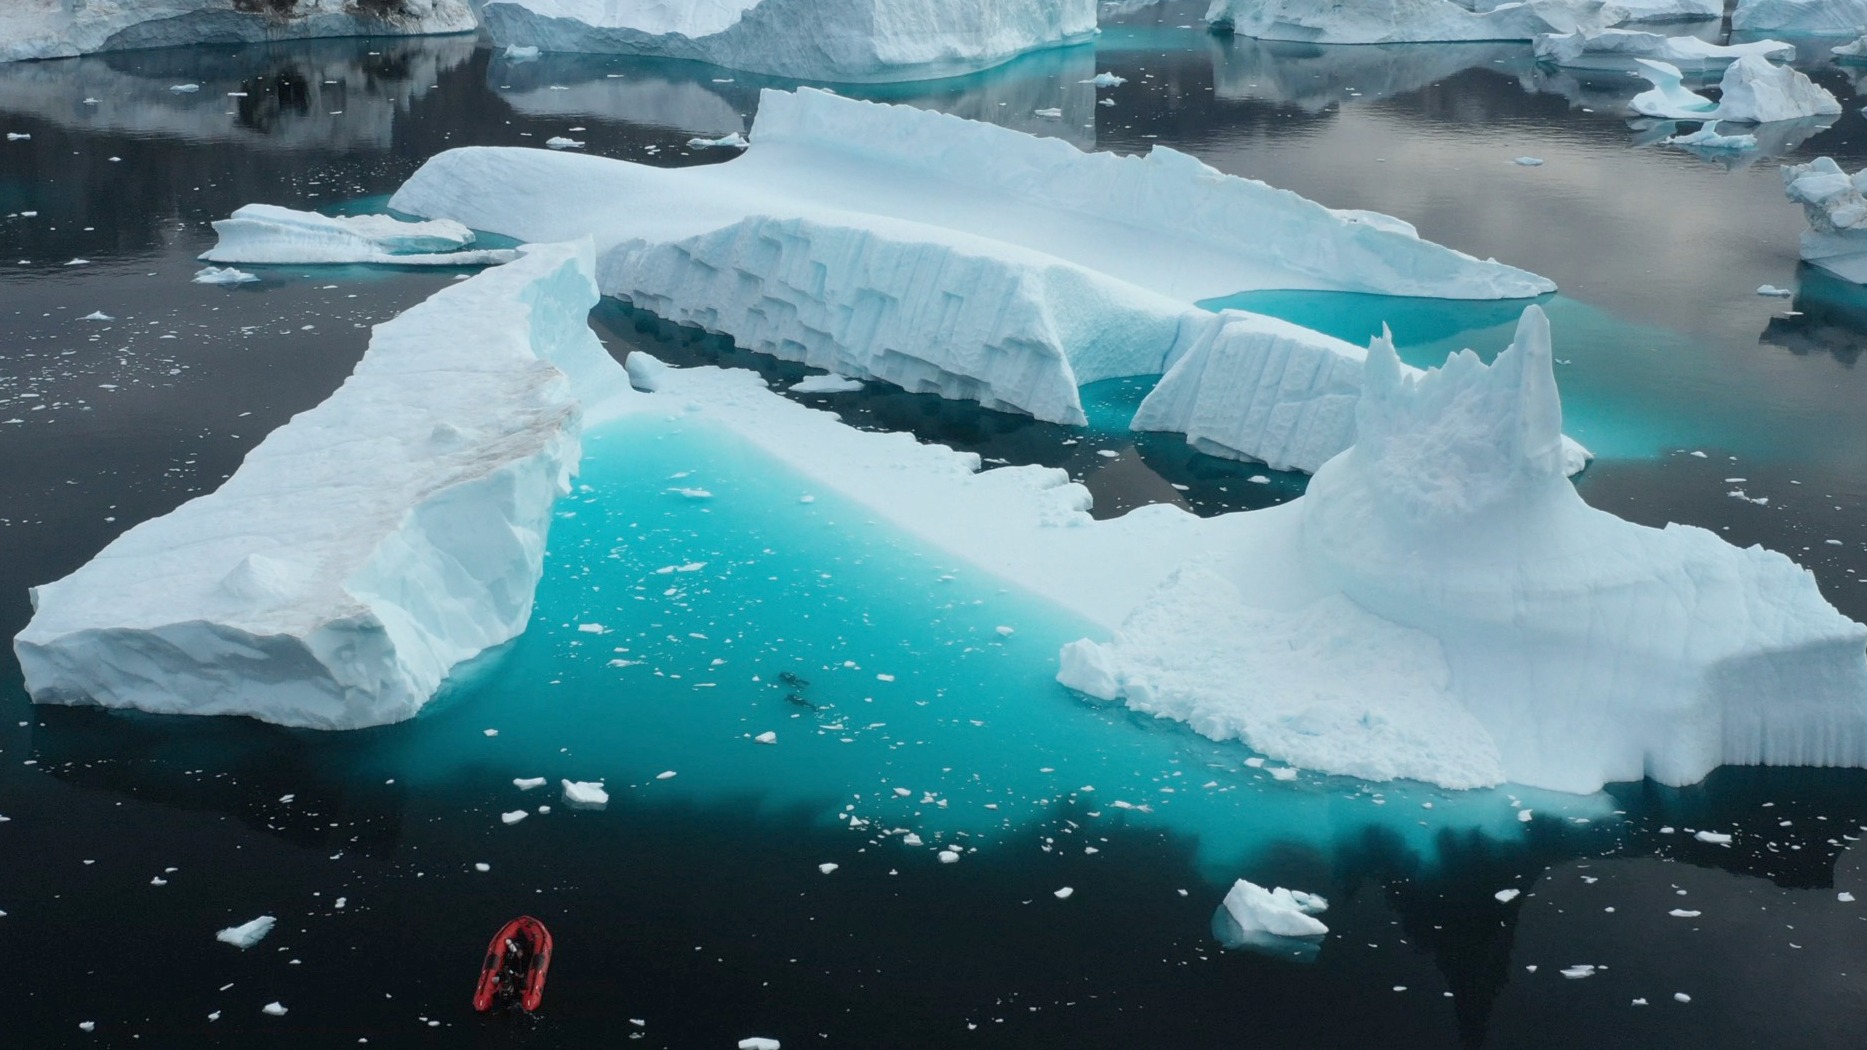 The Greenland iceberg habitat where the snail was found.